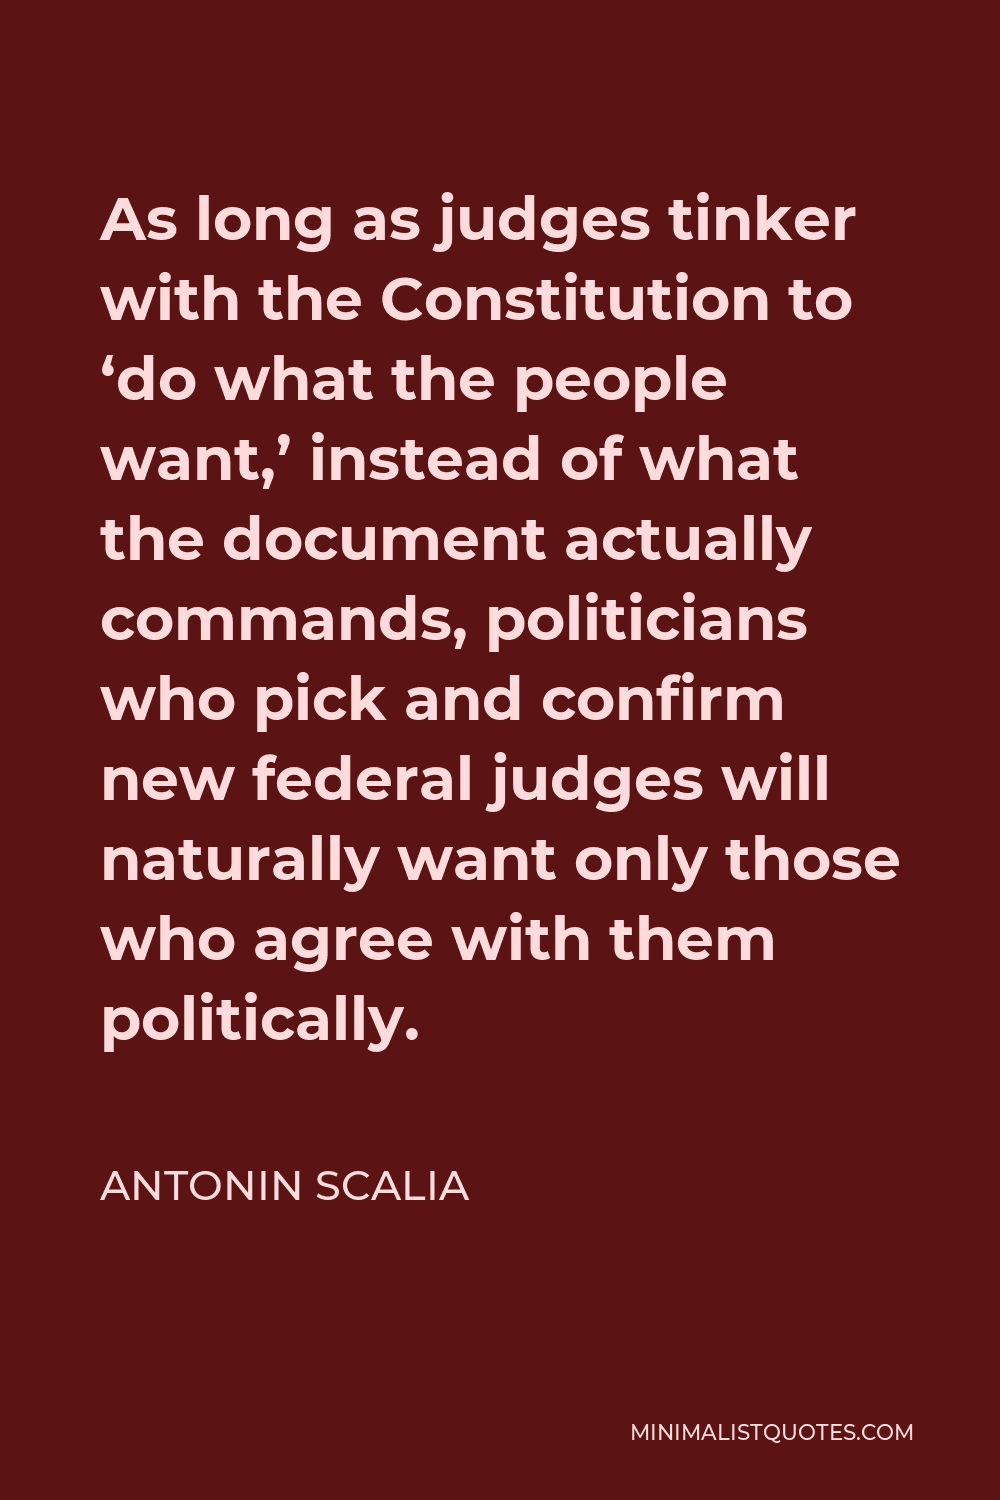 Antonin Scalia Quote - As long as judges tinker with the Constitution to ‘do what the people want,’ instead of what the document actually commands, politicians who pick and confirm new federal judges will naturally want only those who agree with them politically.